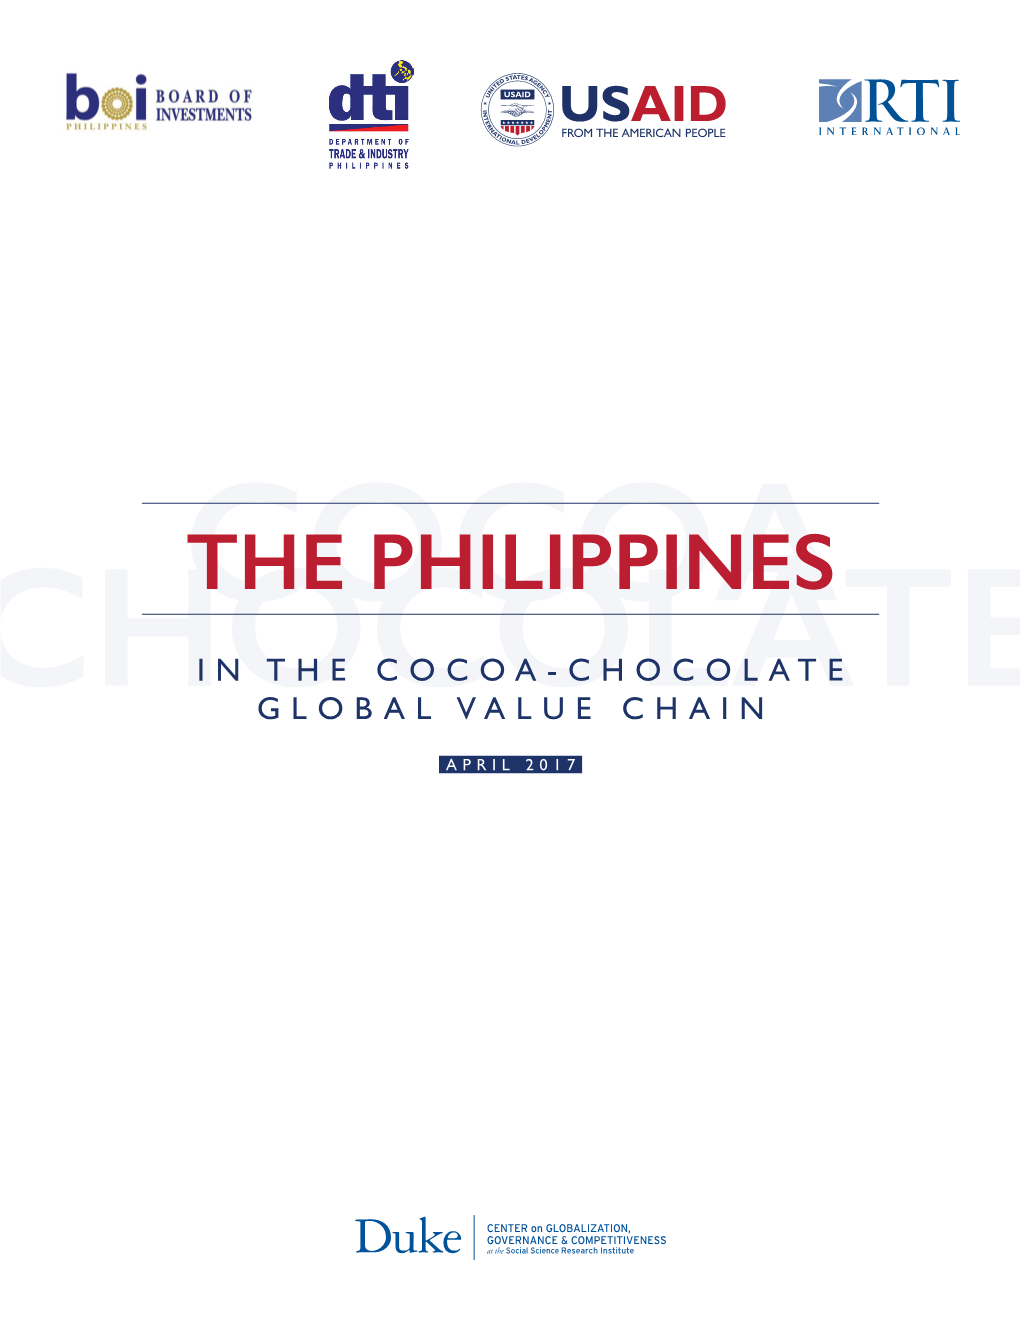 In the Cocoa-Chocolate Global Value Chain